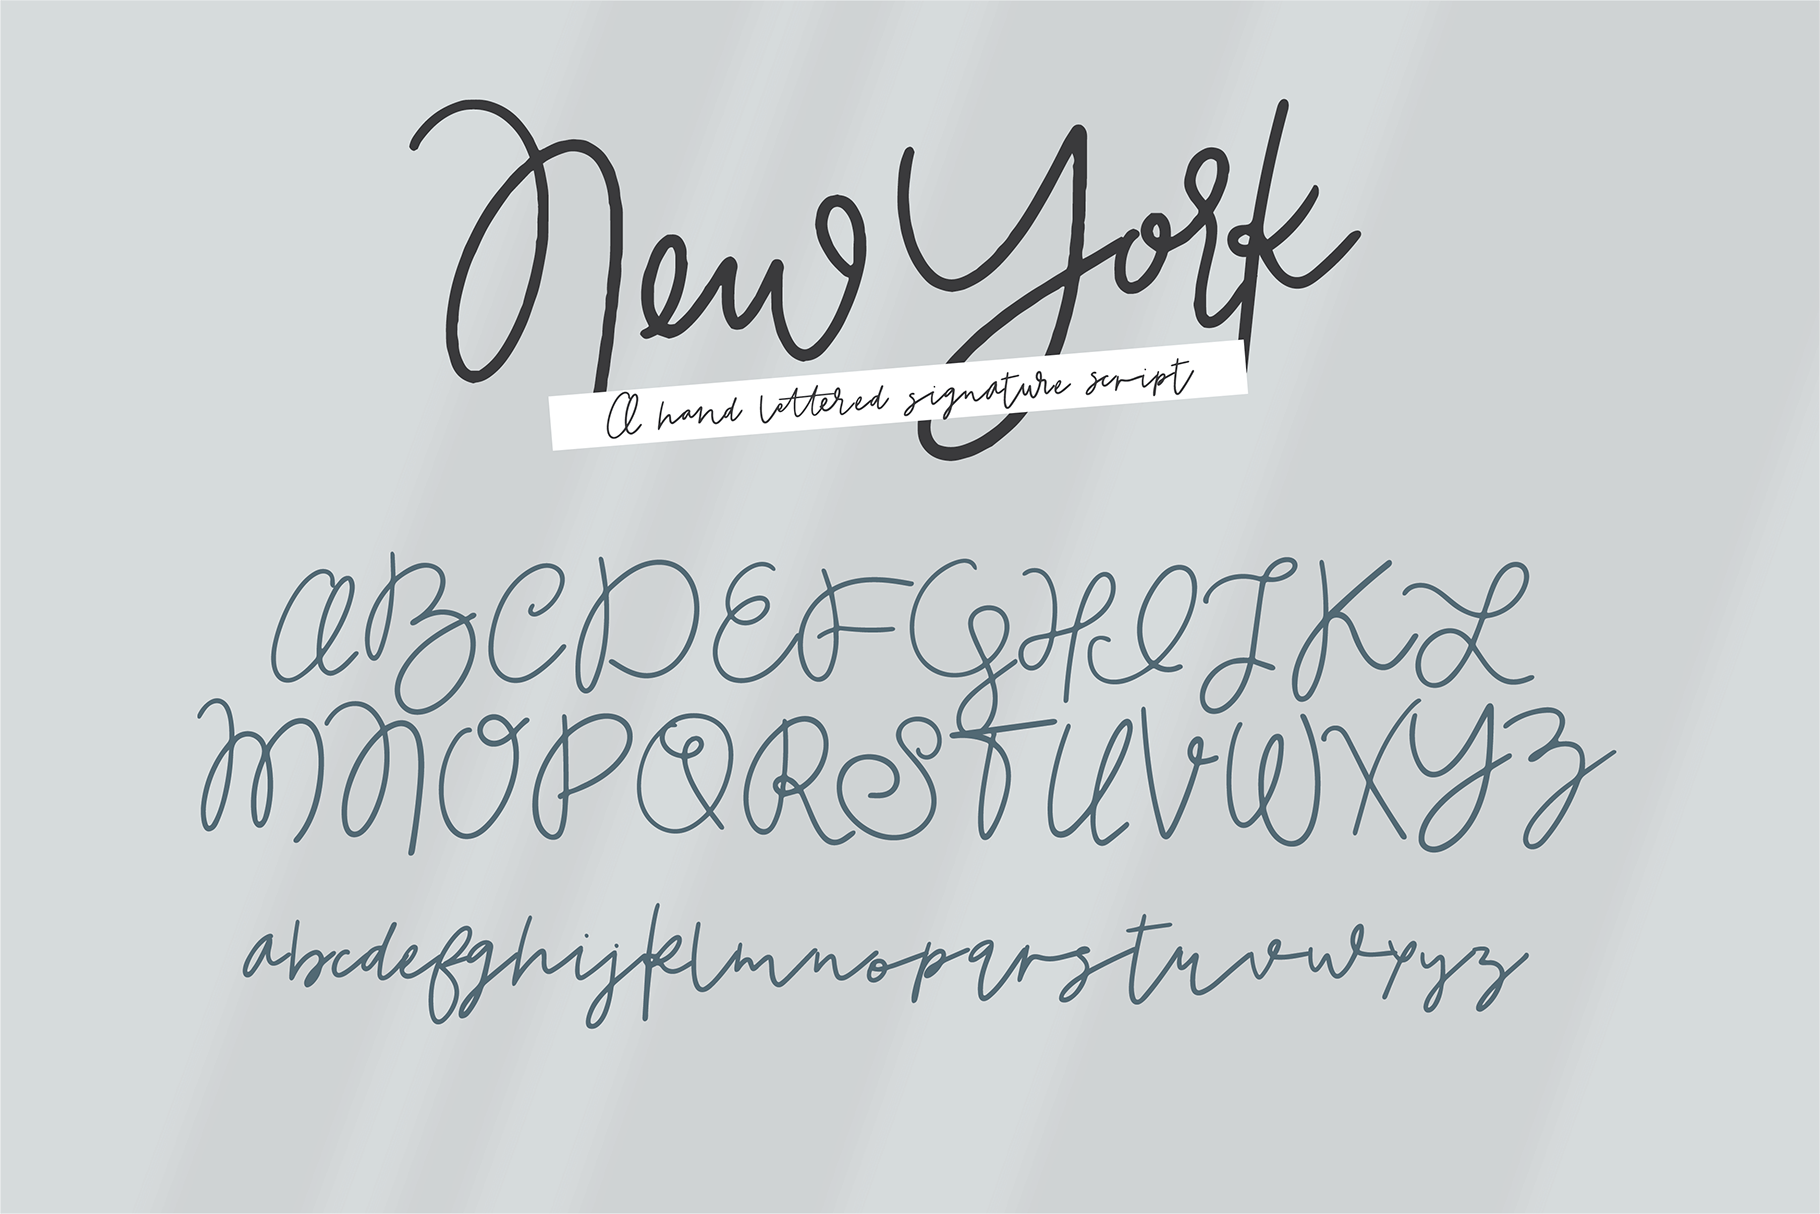 NEW YORK a Hand Lettered Signature Script Font By Blush Font Co.